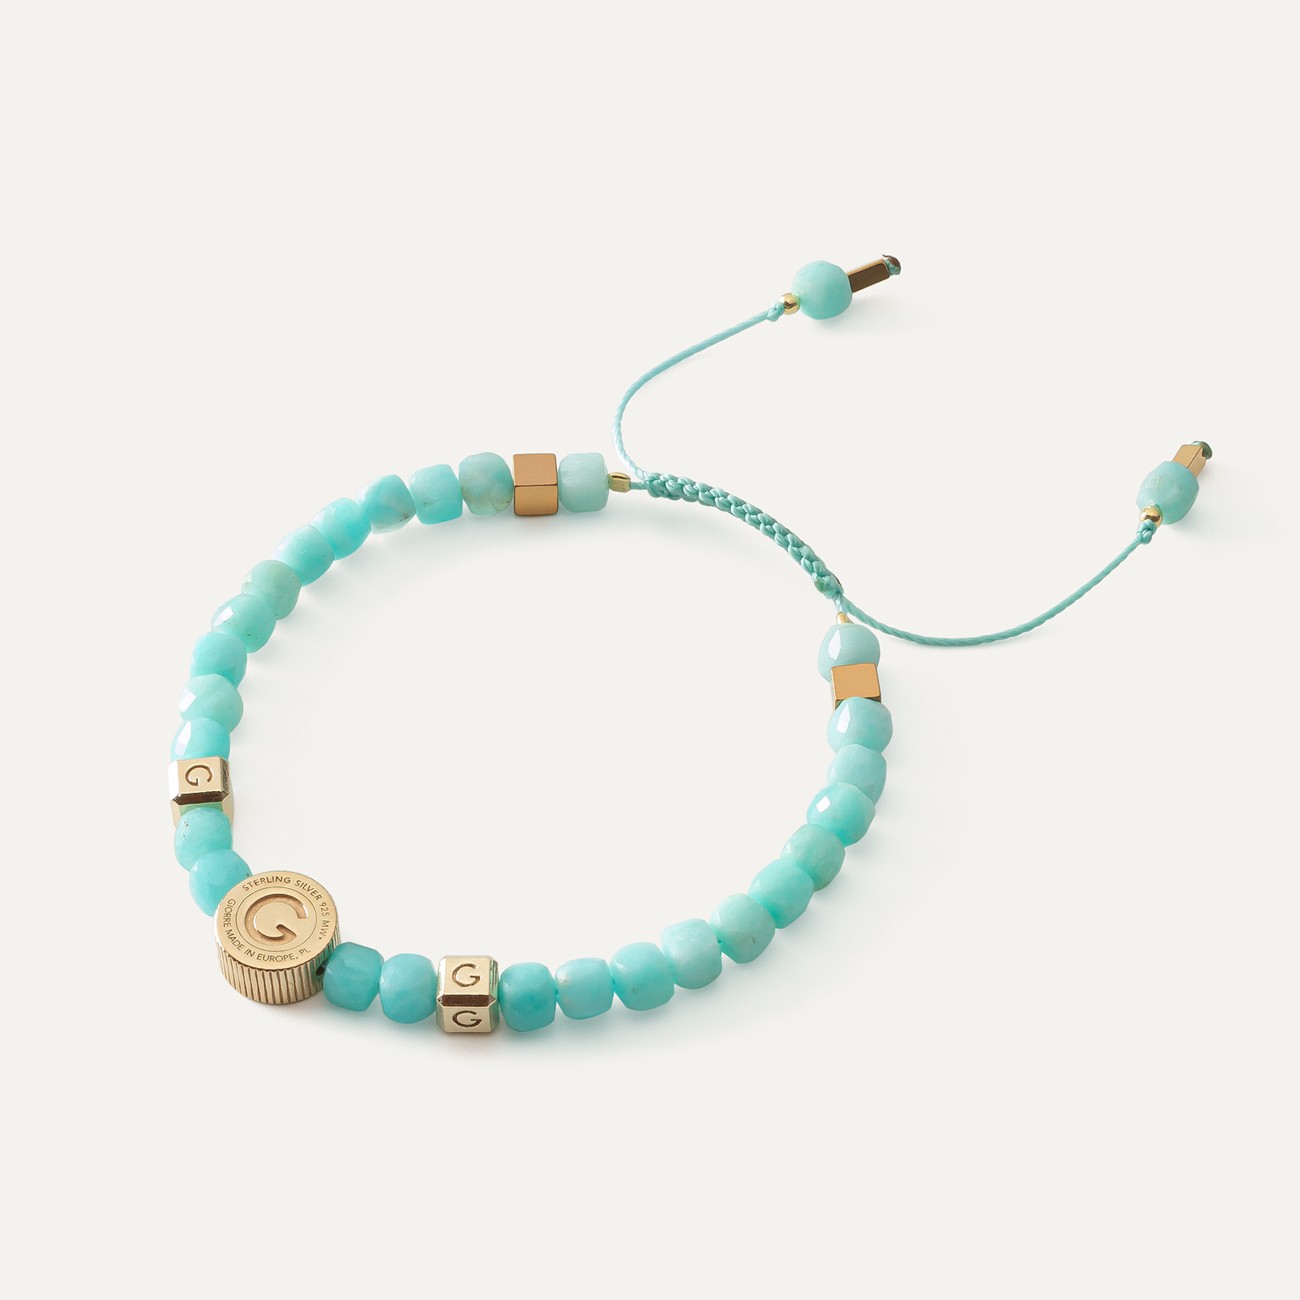 Silver bracelet with natural stone - amazonite